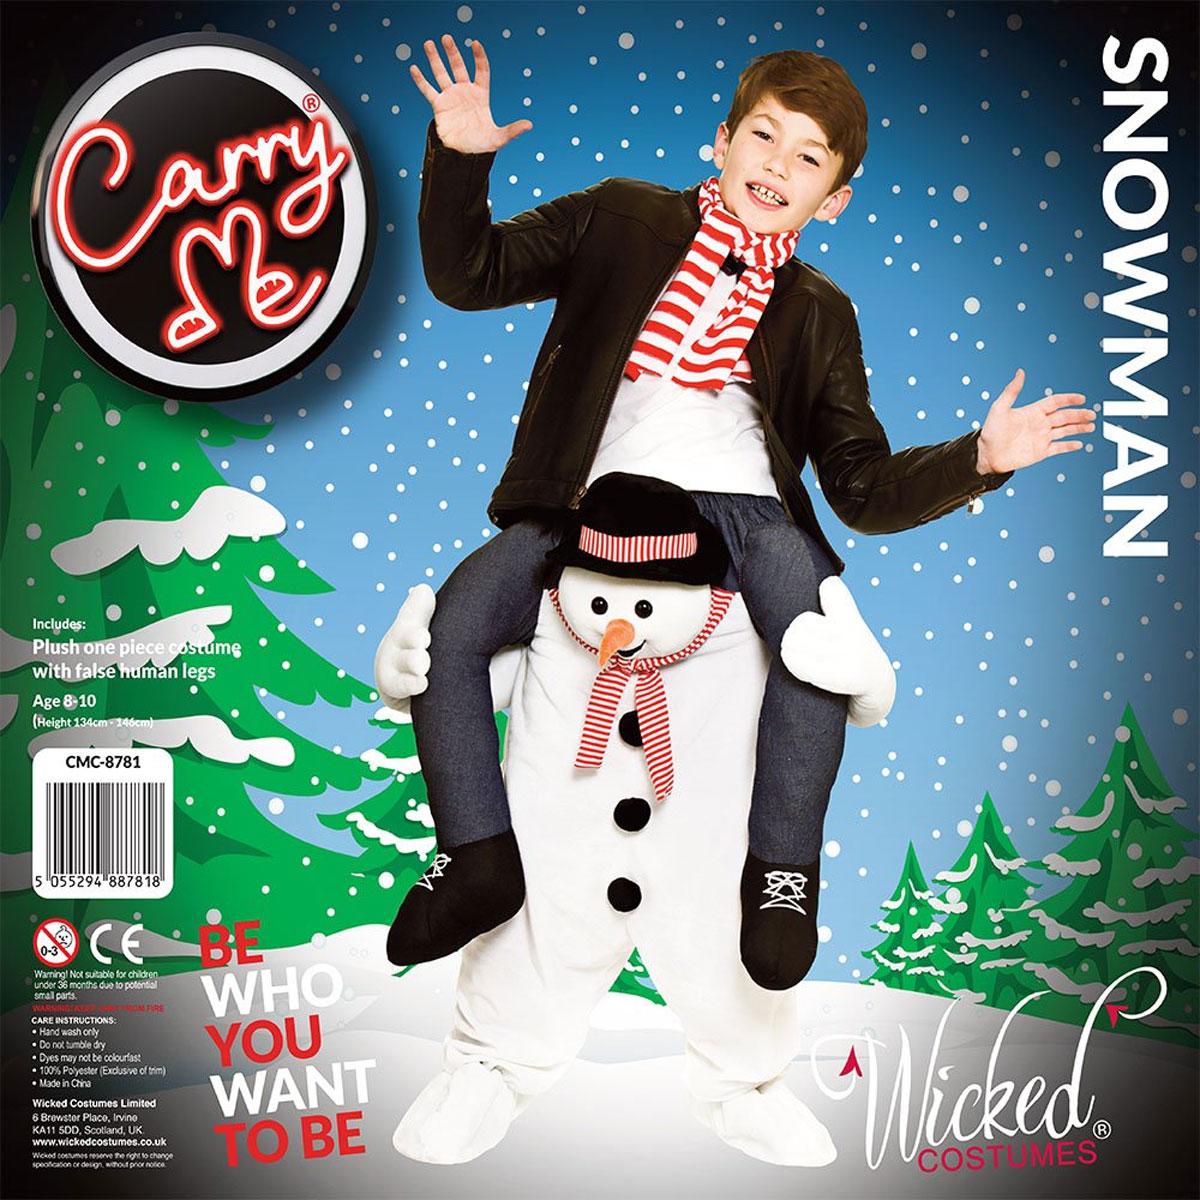 Carry Me Snowman Fancy Dress Costume for Kids by Wicked CMC-8781 available here at Karnival Costumes online party shop